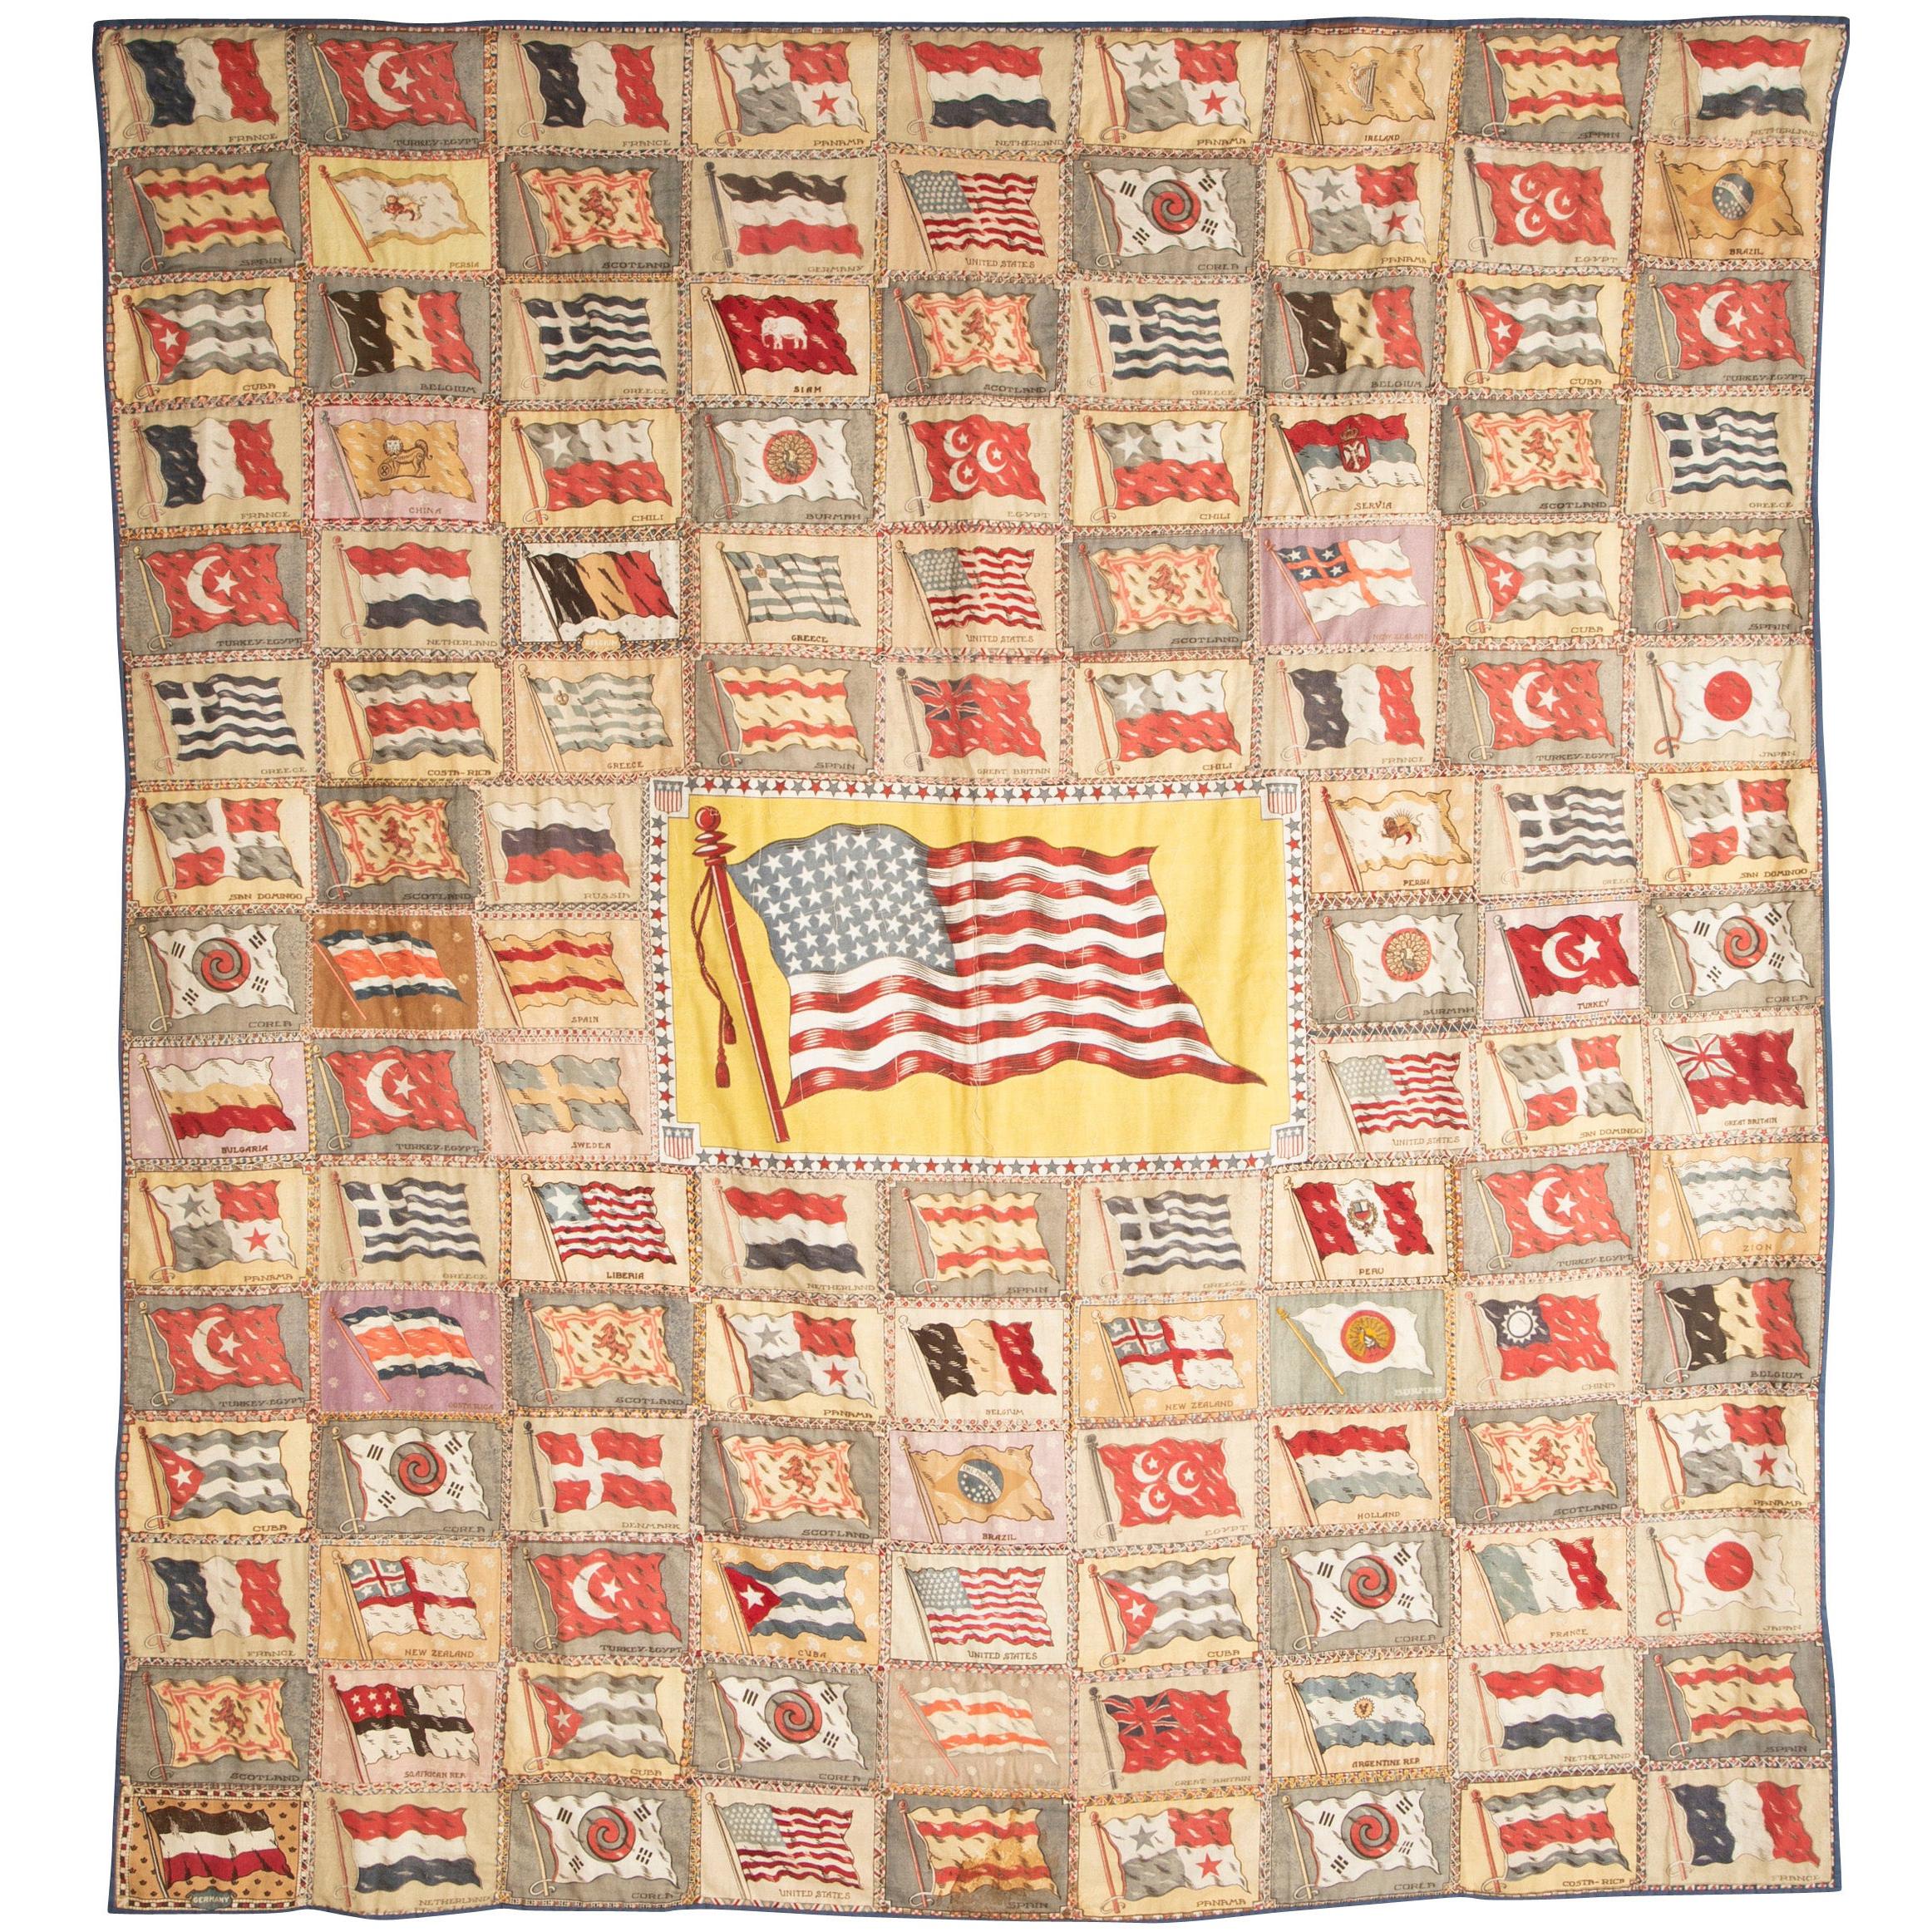 Wall Hanging / Quilt Composed of Cigar Box Painted Felt Flags